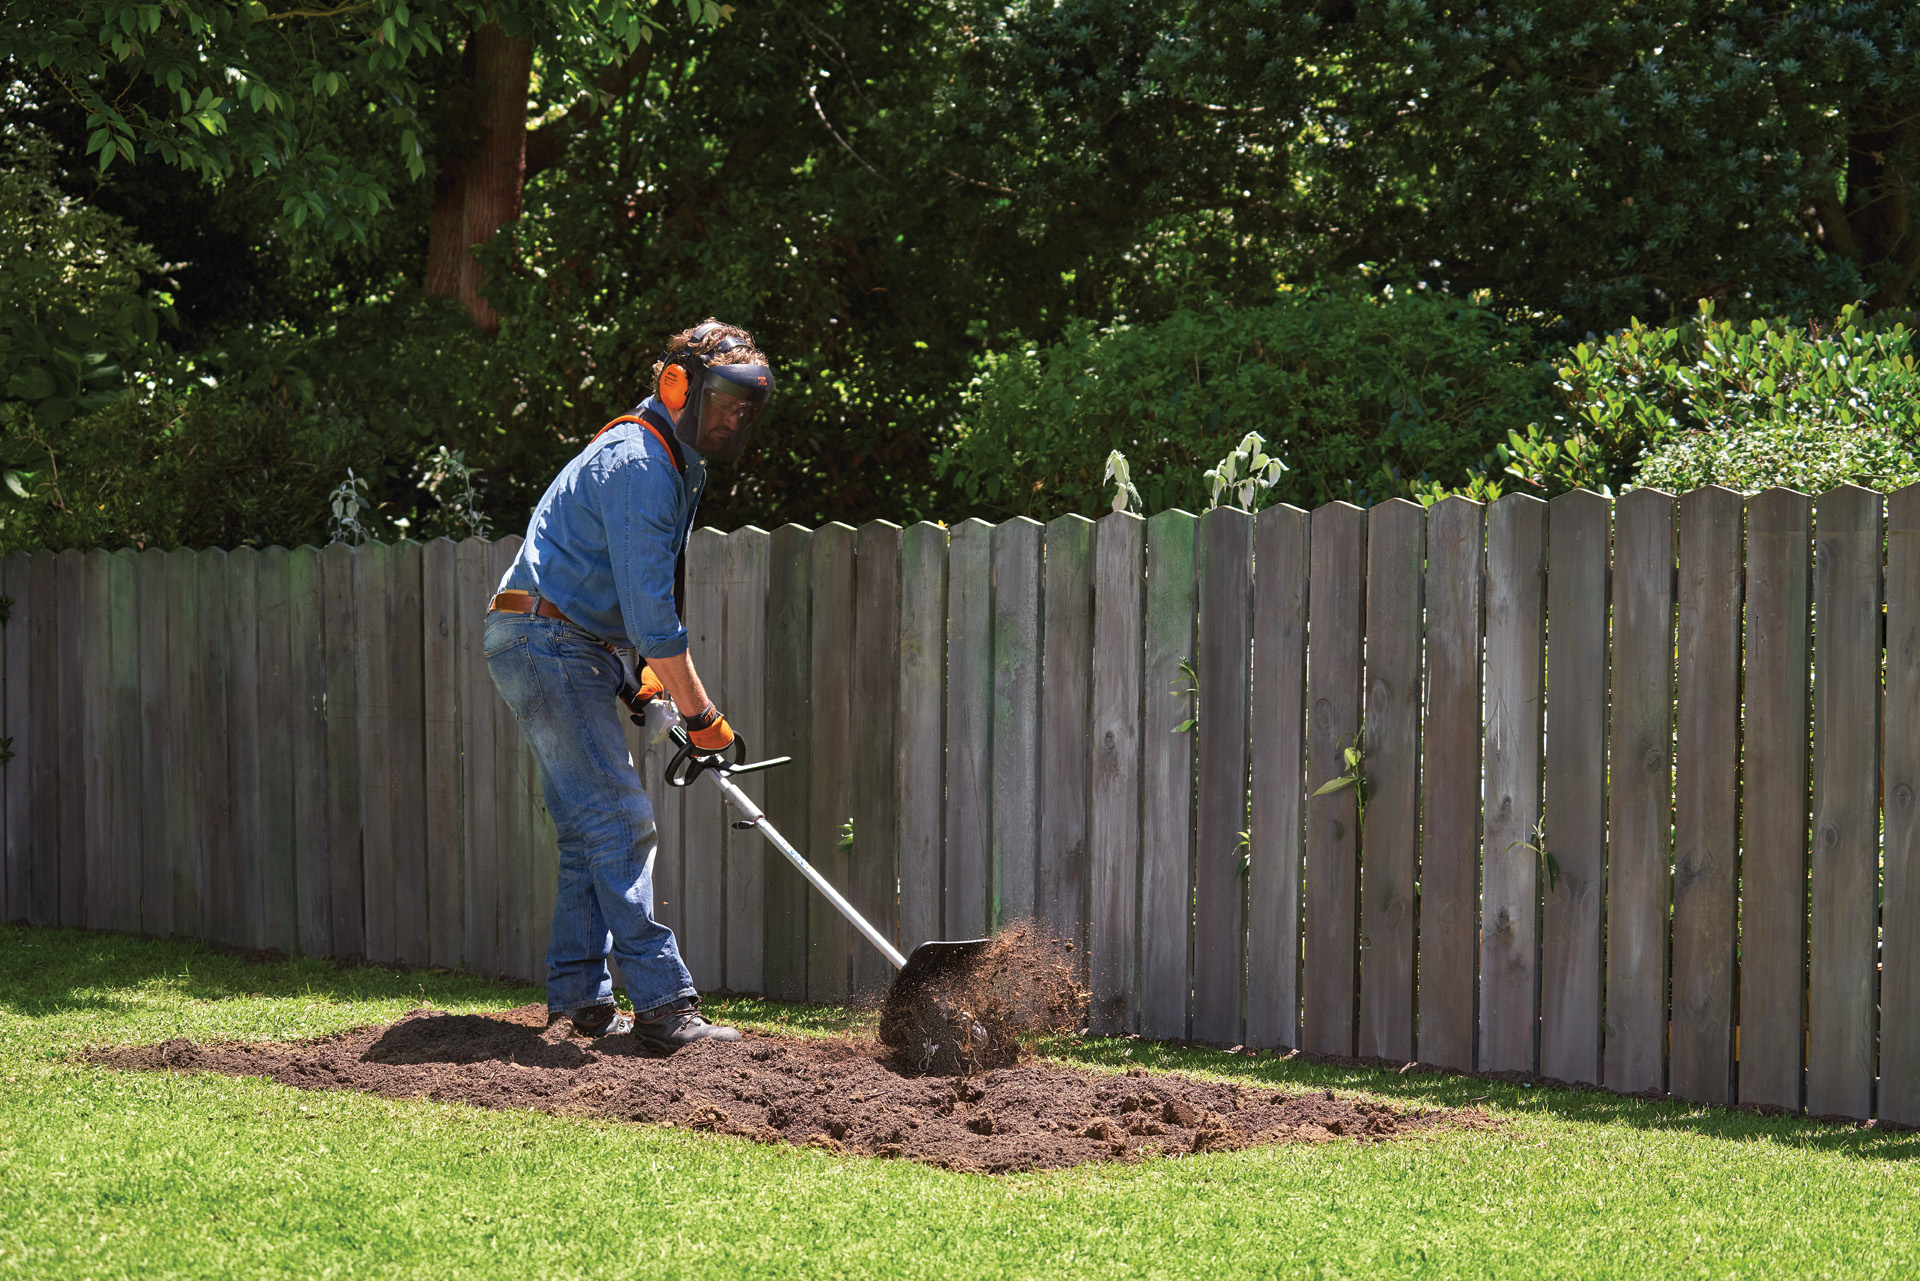 A person wearing personal protective equipment cultivates soil for a vegetable bed using a STIHL KombiSystem with pick tine